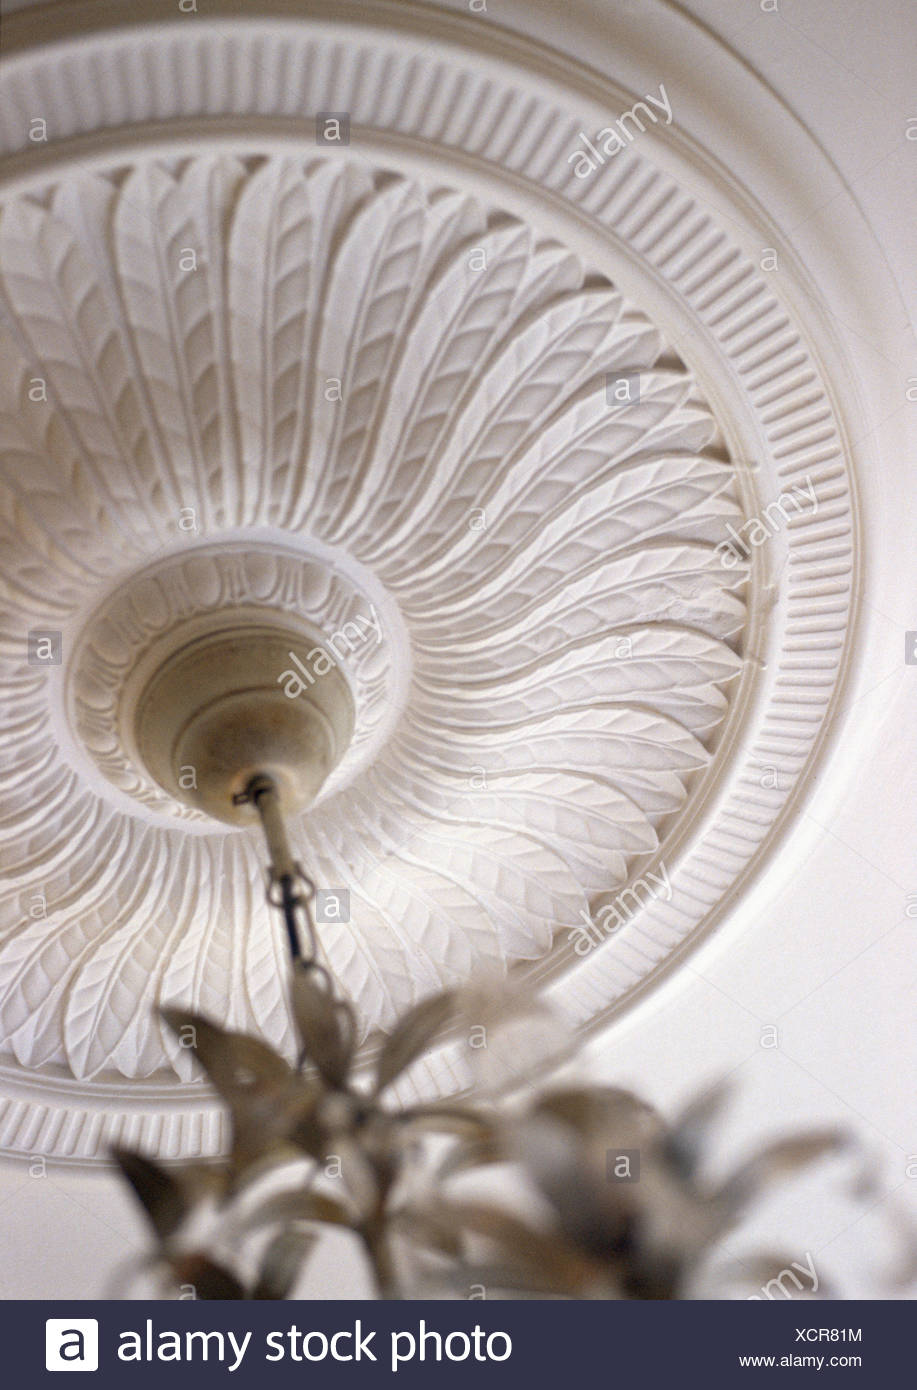 Looking Up At Ornate White Plasterwork Victorian Ceiling